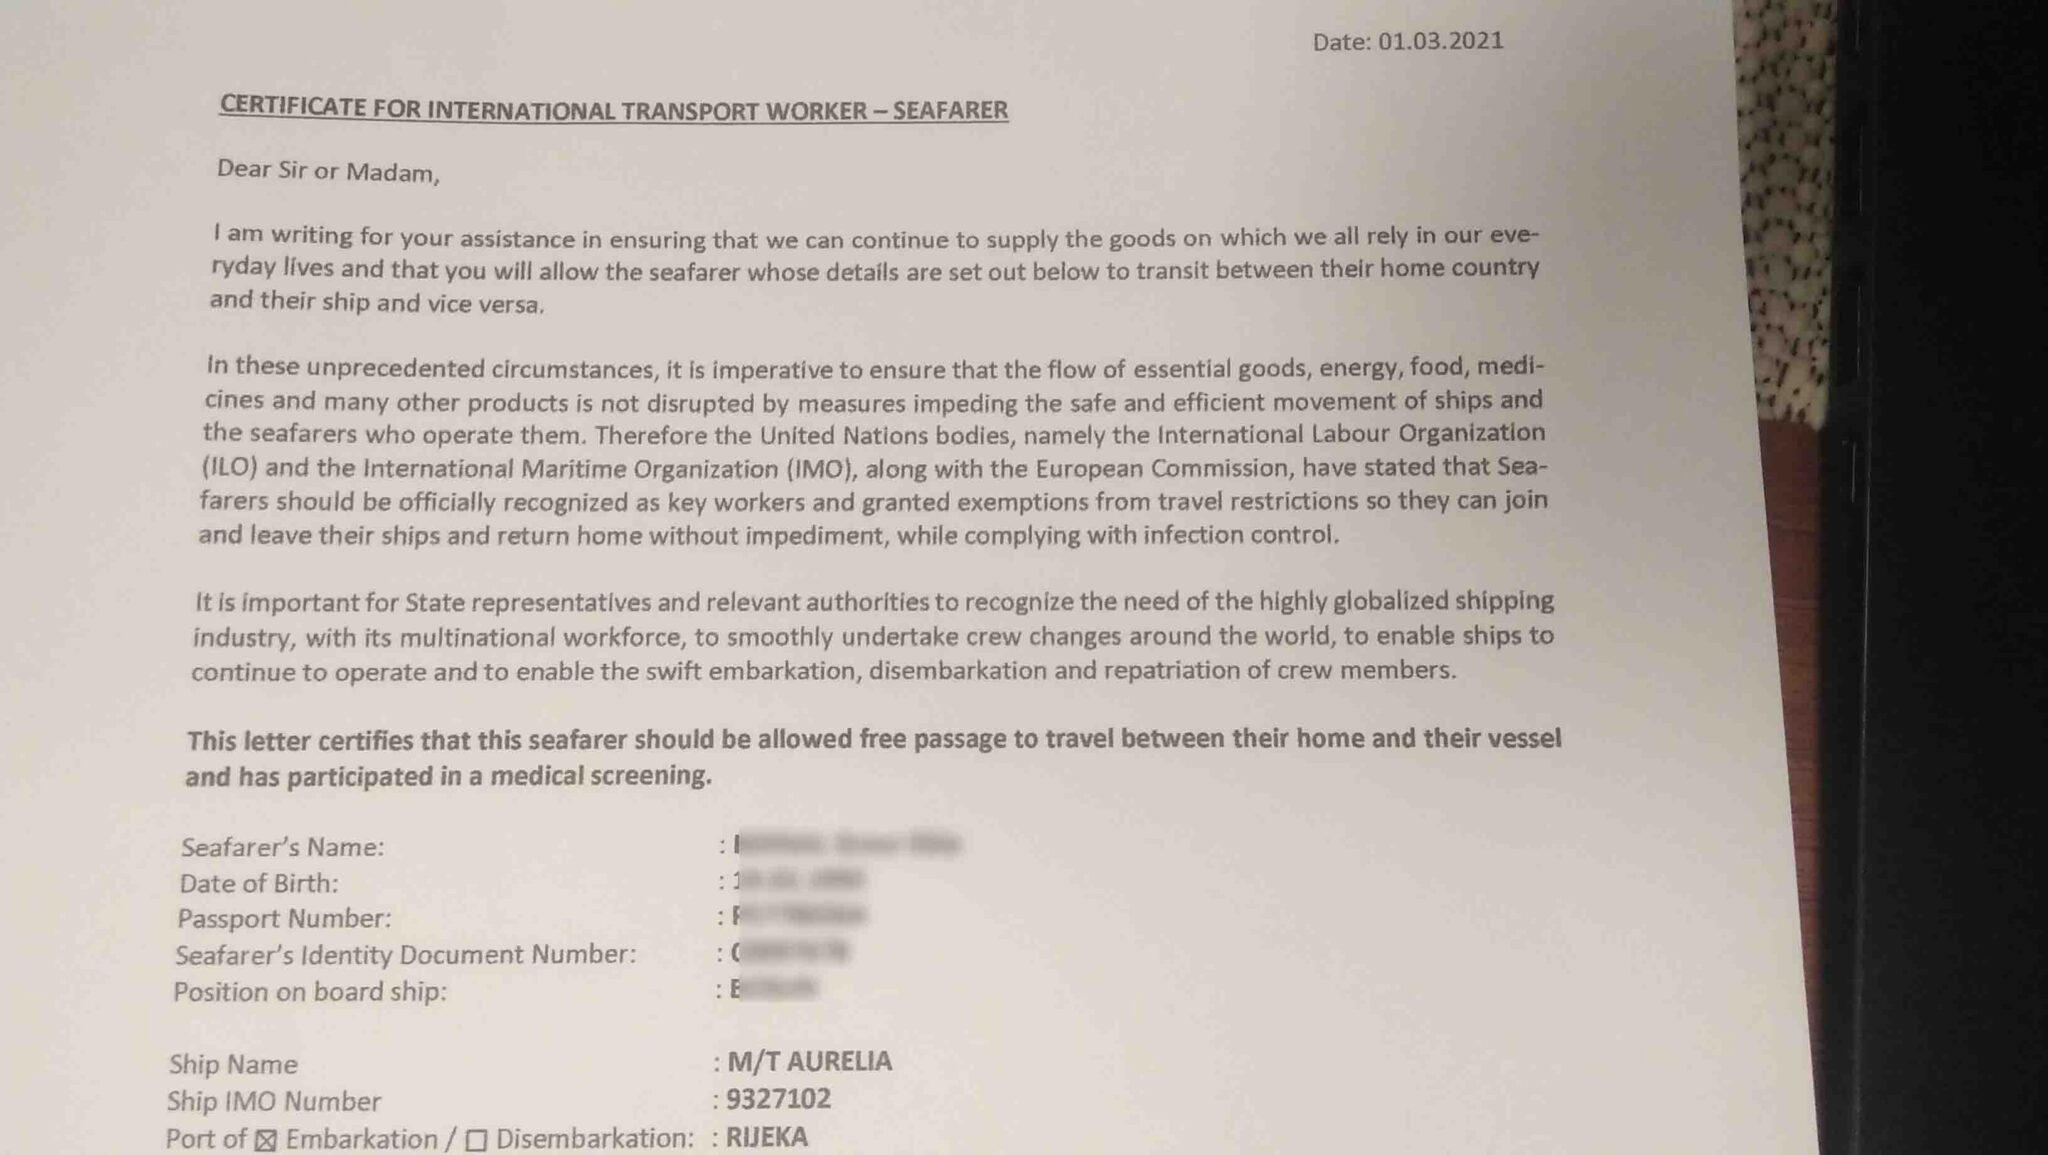 Certificate for International Transport Workers - Seafarers. A letter certifying that the seafarer should be allowed free passage between their home and their vessel.